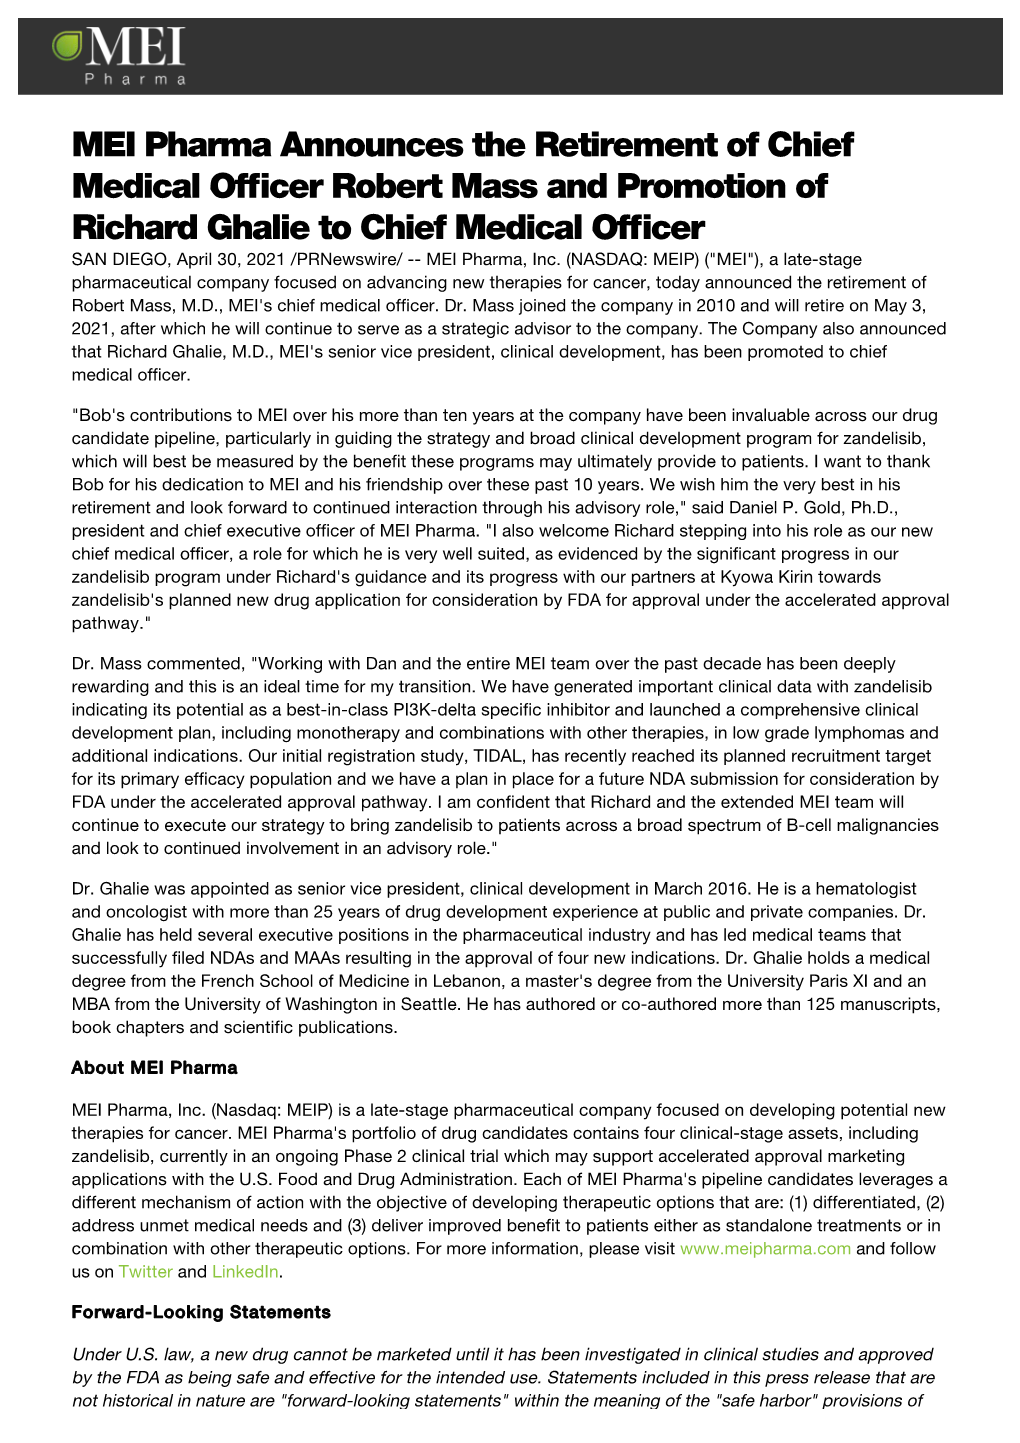 MEI Pharma Announces the Retirement of Chief Medical Officer